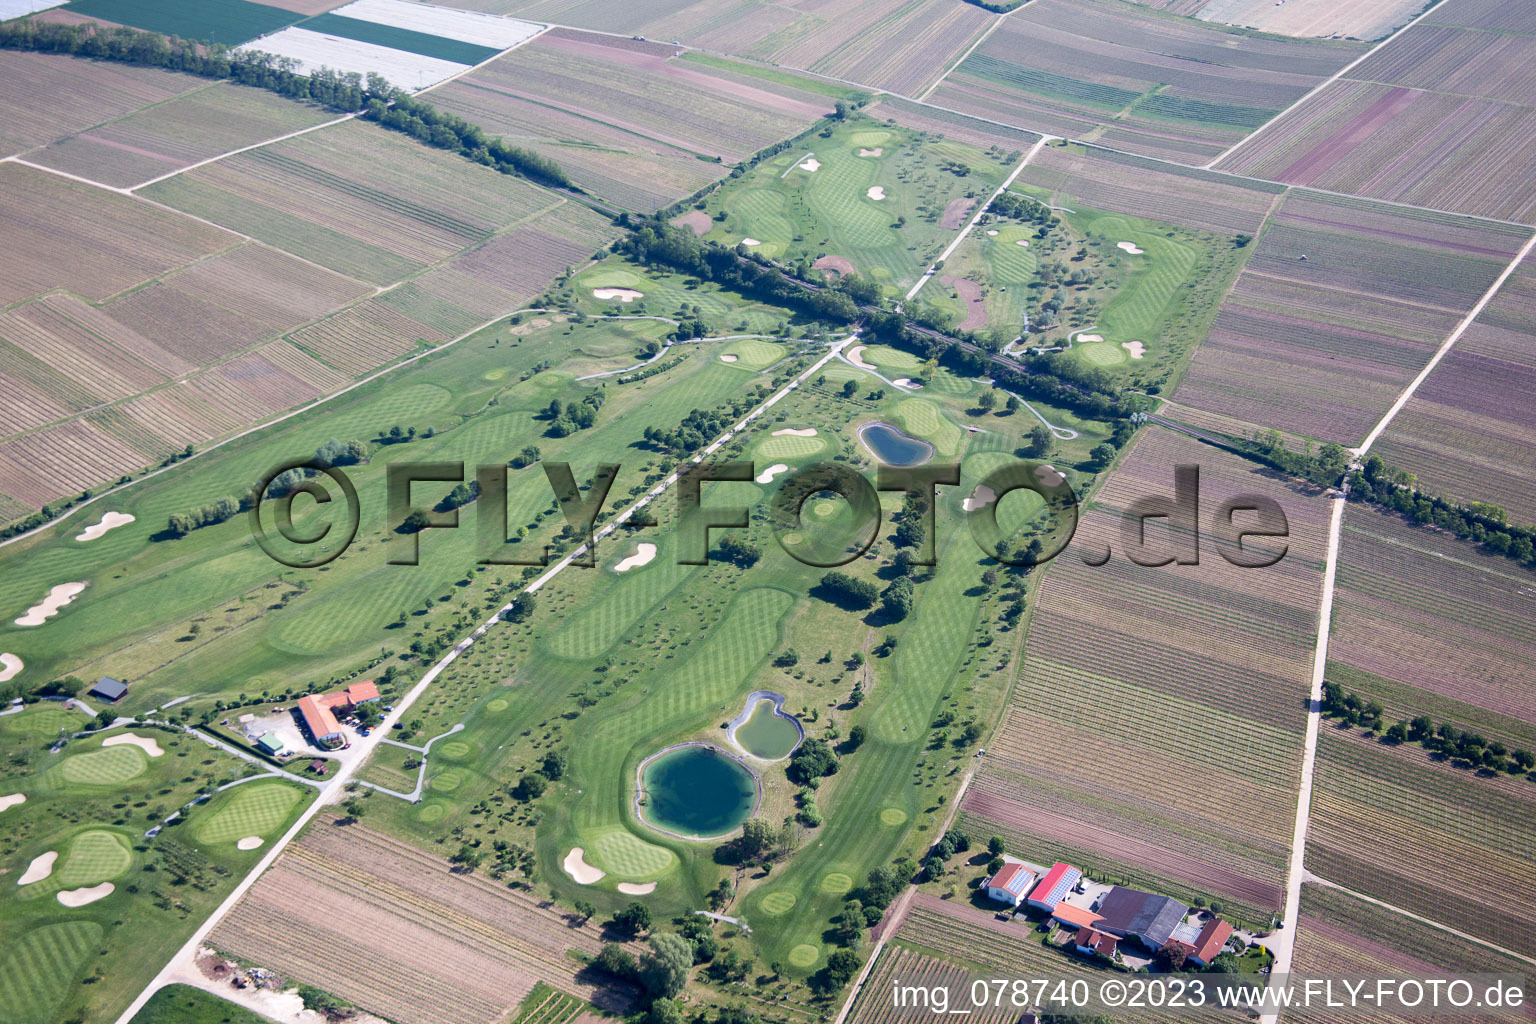 Bird's eye view of Golf course in Dackenheim in the state Rhineland-Palatinate, Germany